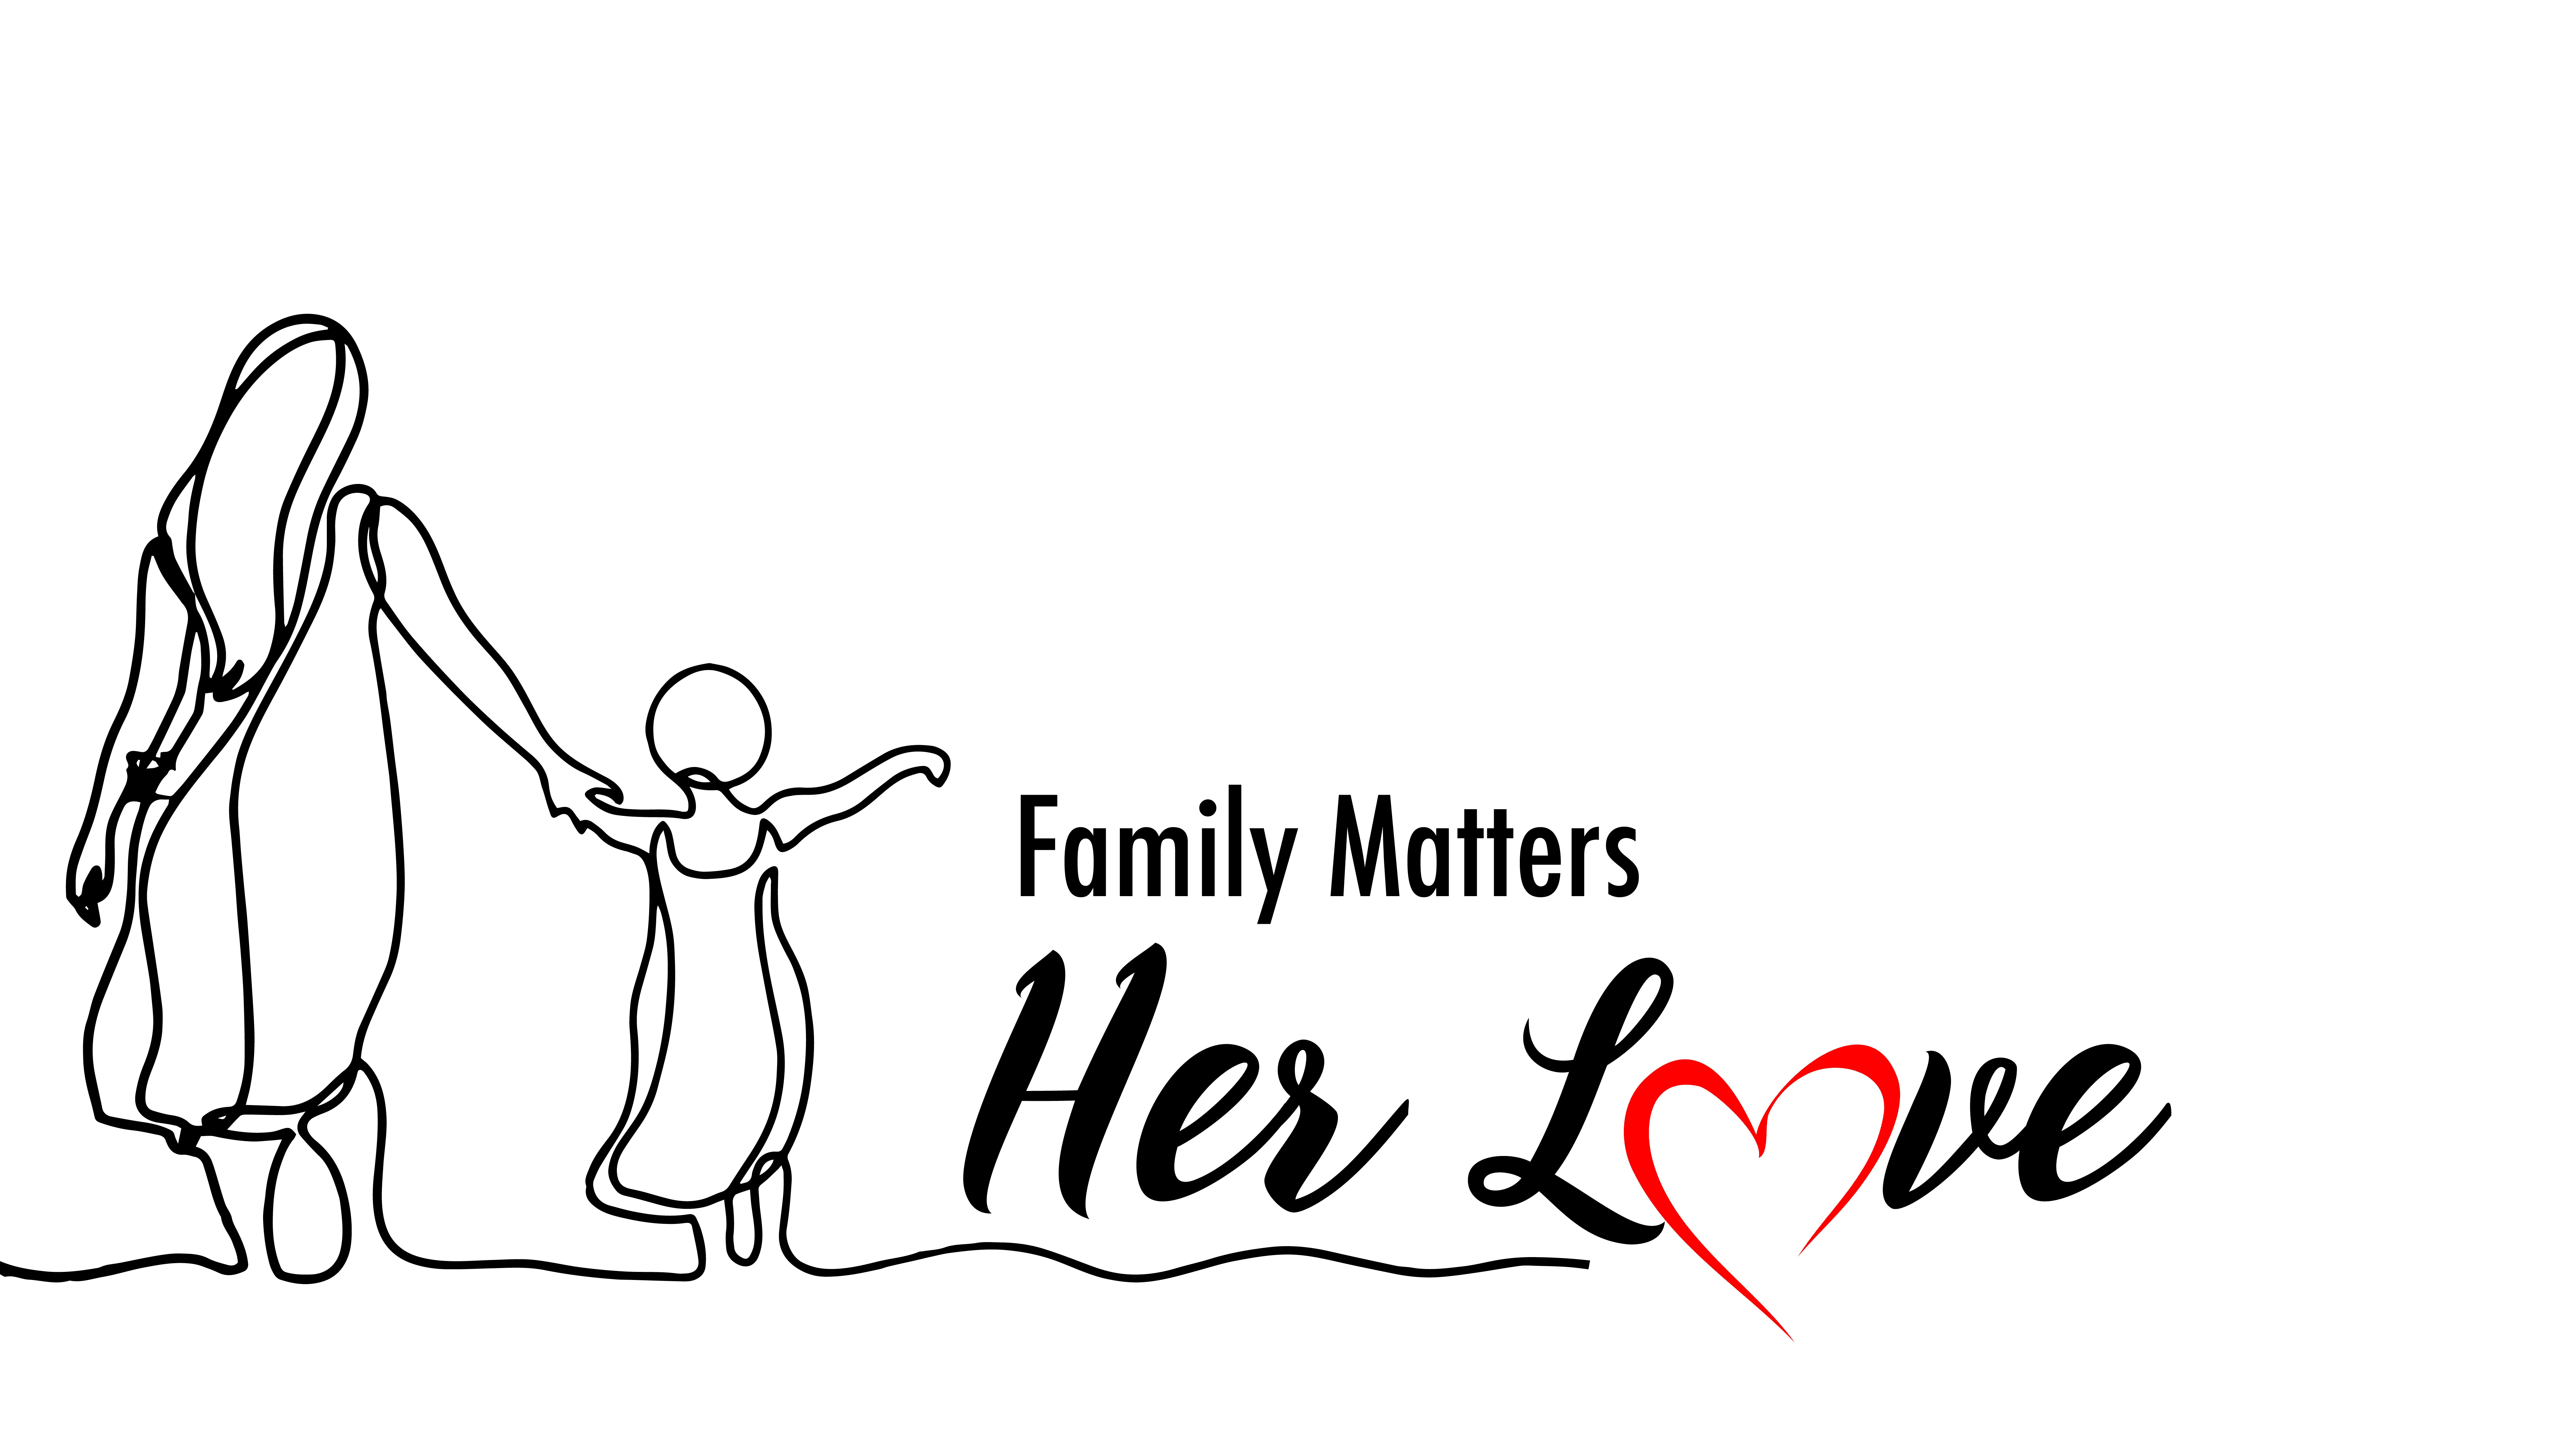 Family Matters - Her Love